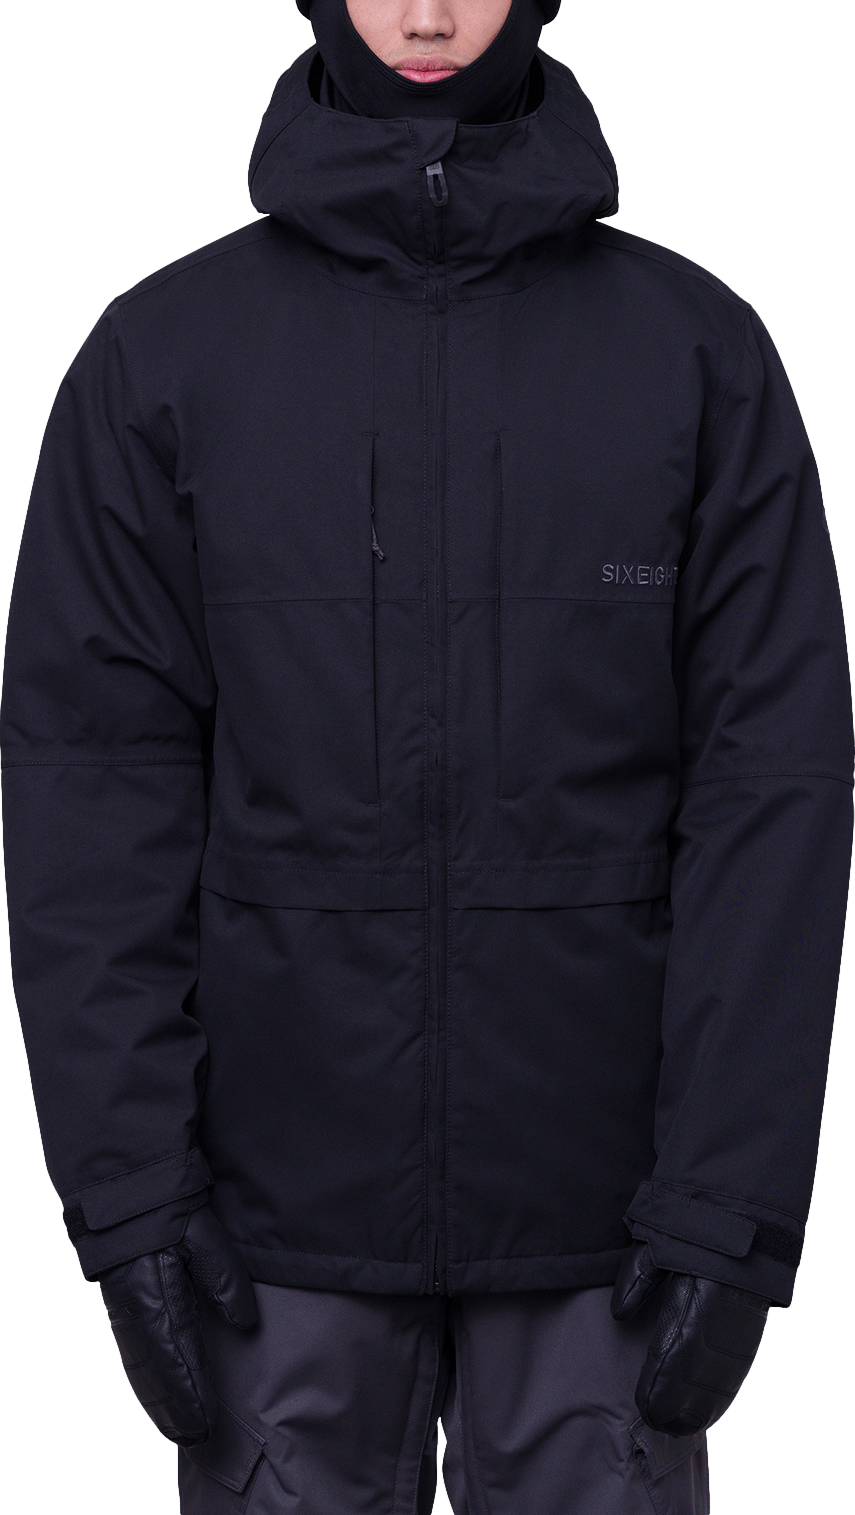 686 Smarty Form 3 in 1 Jacket